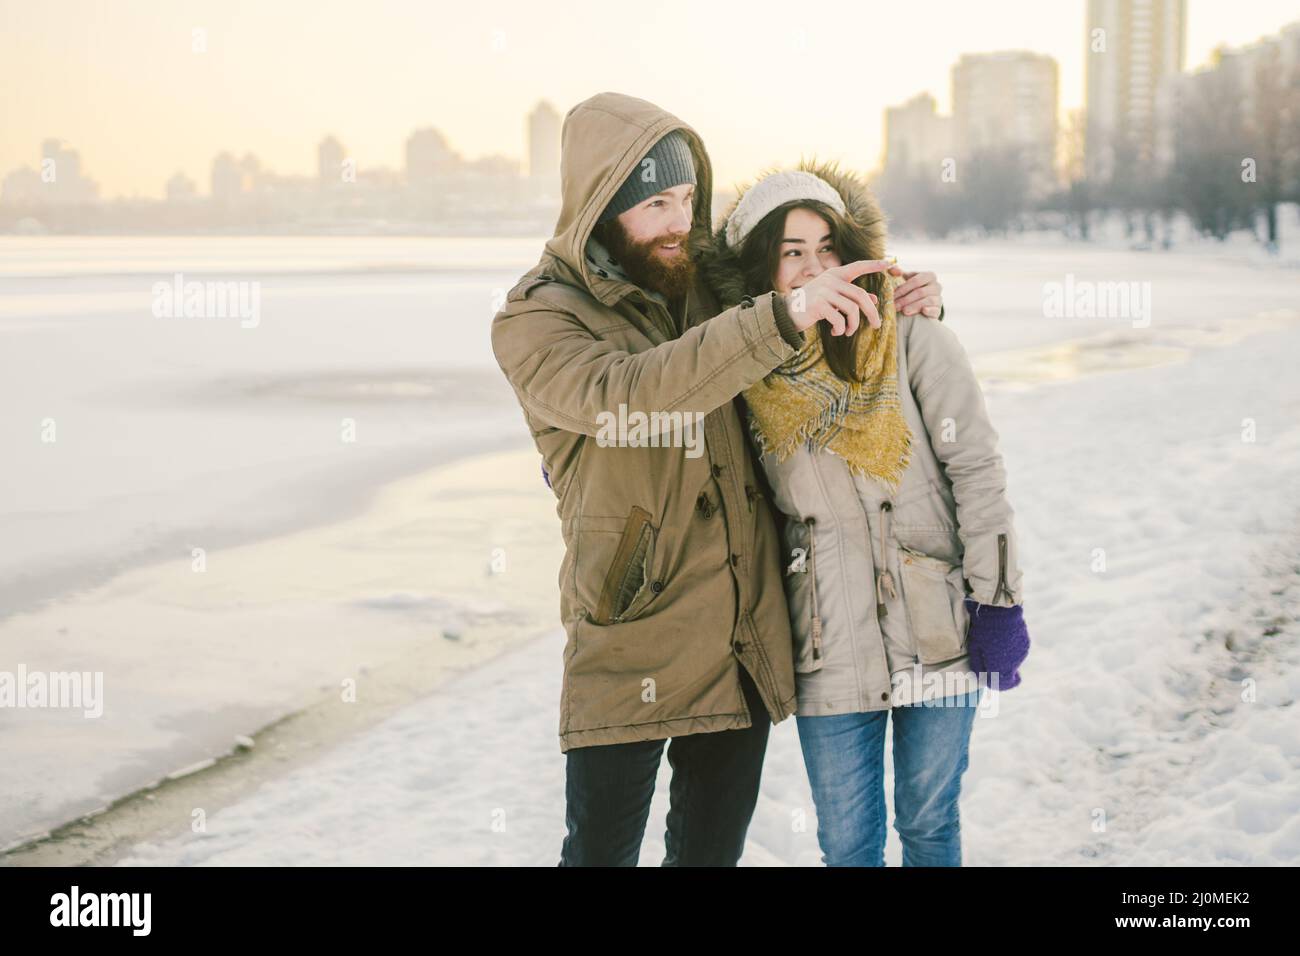 Theme love and date on nature. A young Caucasian heterosexual couple guy and girl walk in the winter along a frozen lake in wint Stock Photo